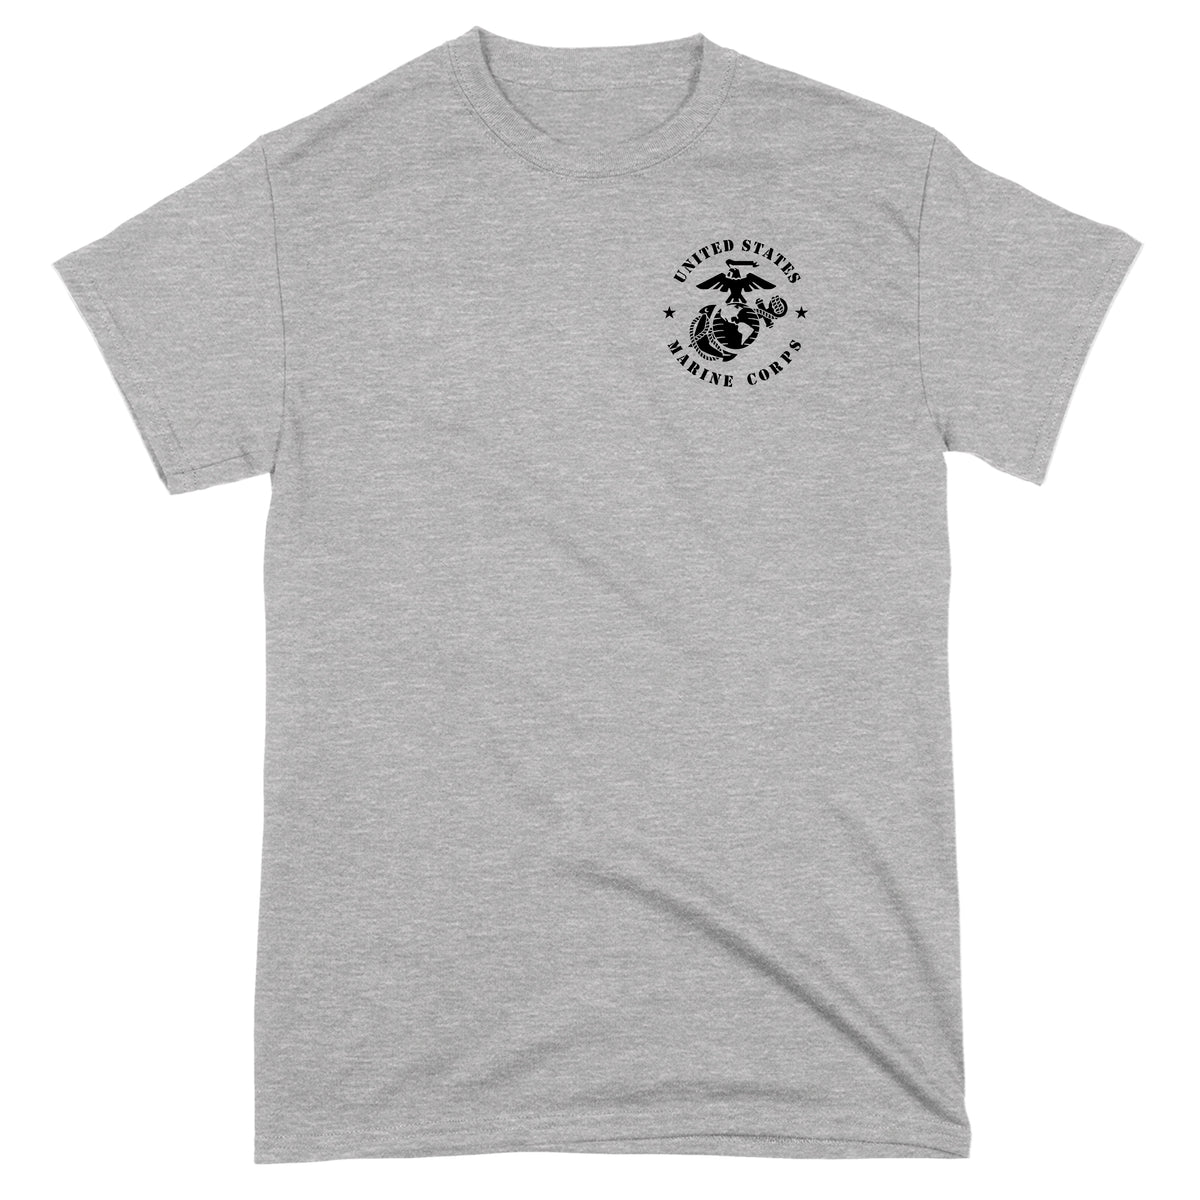 Closeout Full Circle USMC Chest Seal Tee